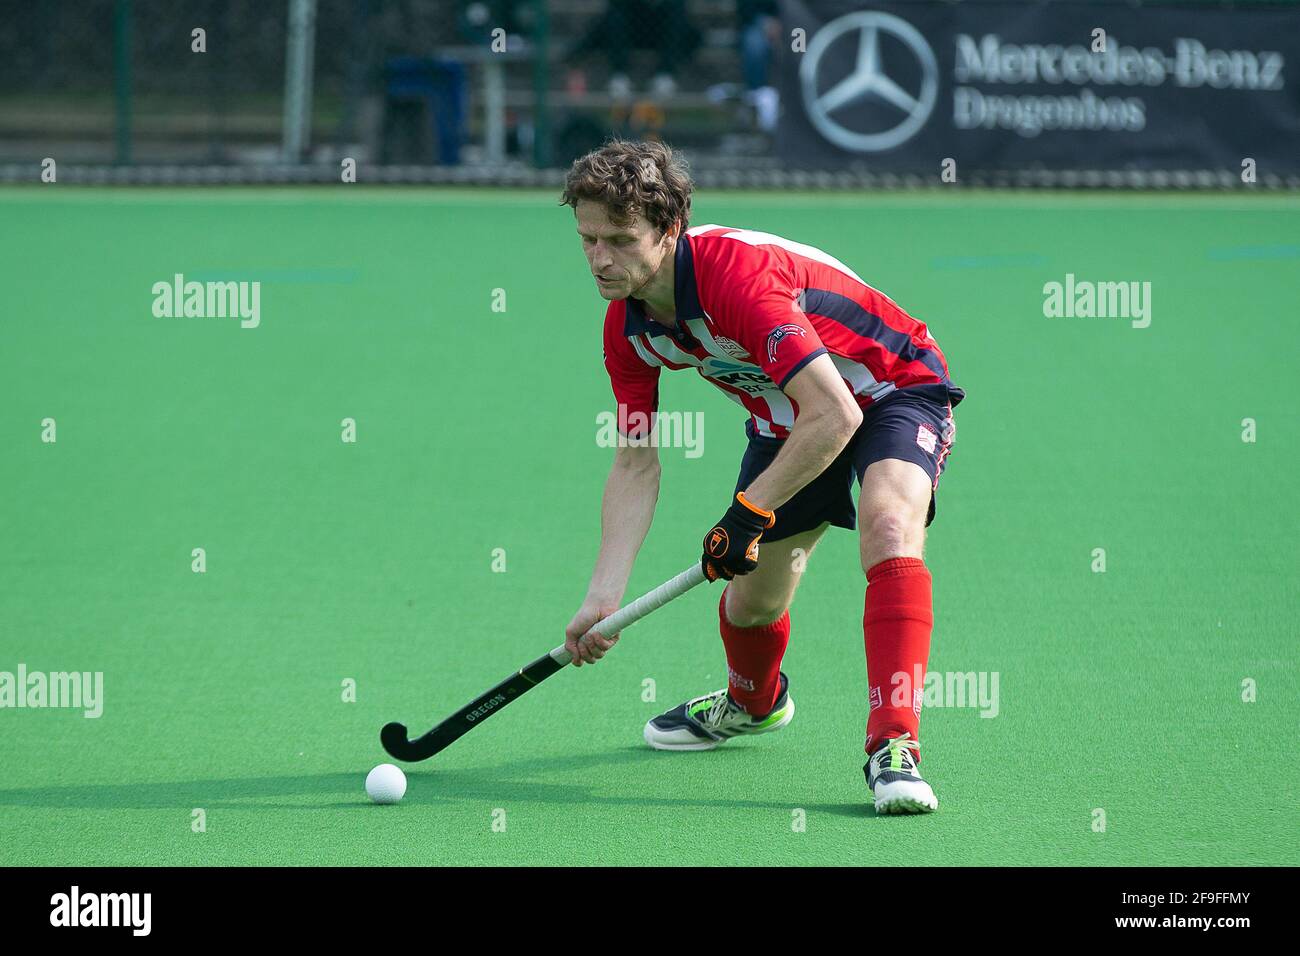 Leopold's Jean-Baptiste Forgues pictured in action during a hockey game between Royal Racing Club Brussels and Royal Leopold Club, Sunday 18 April 202 Stock Photo